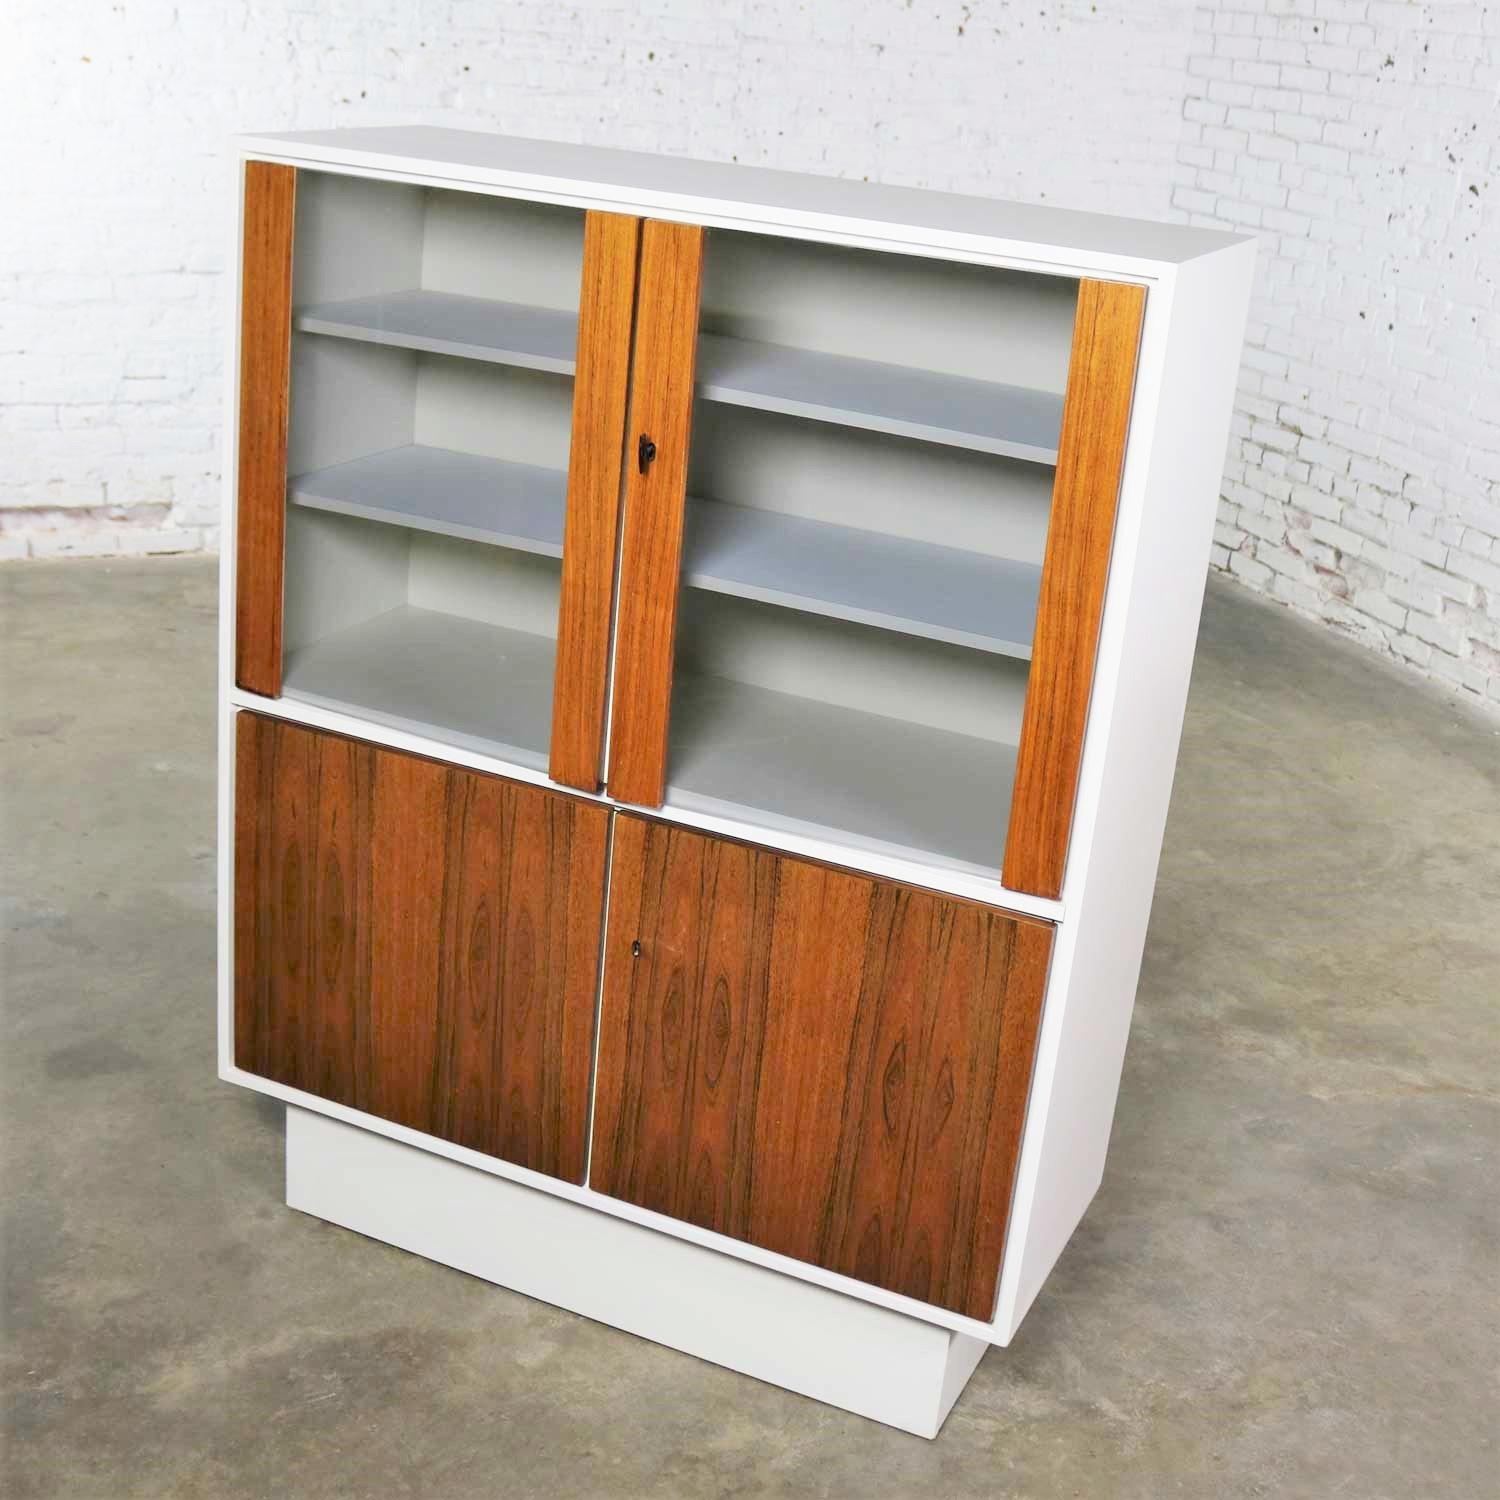 Awesome china or display cabinet in a Mid-Century Modern and/or Scandinavian Modern style with a creamy white painted case on a plinth base and teak and glass doors. This piece is in fabulous condition. Its white painted finish has been freshened